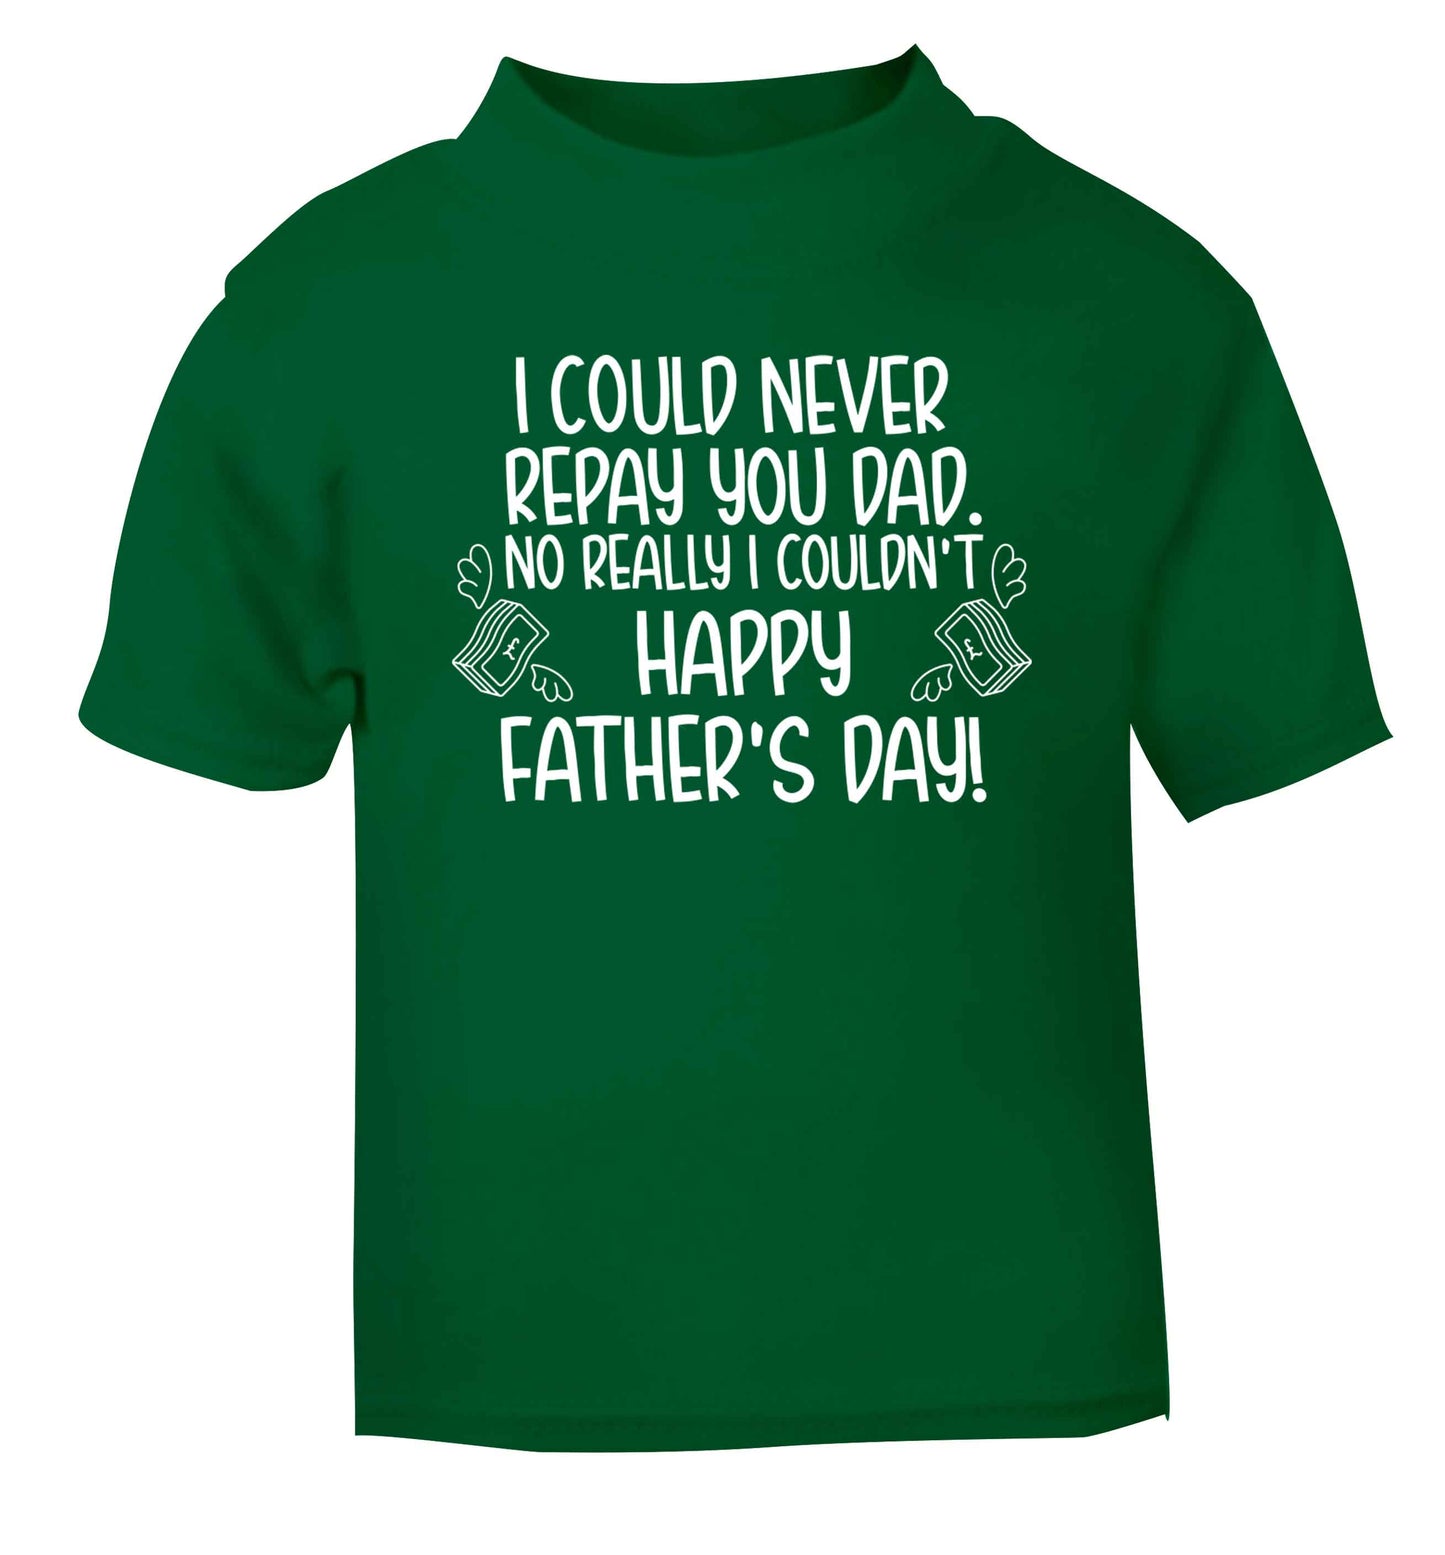 I could never repay you dad. No I really couldn't happy Father's day! green baby toddler Tshirt 2 Years